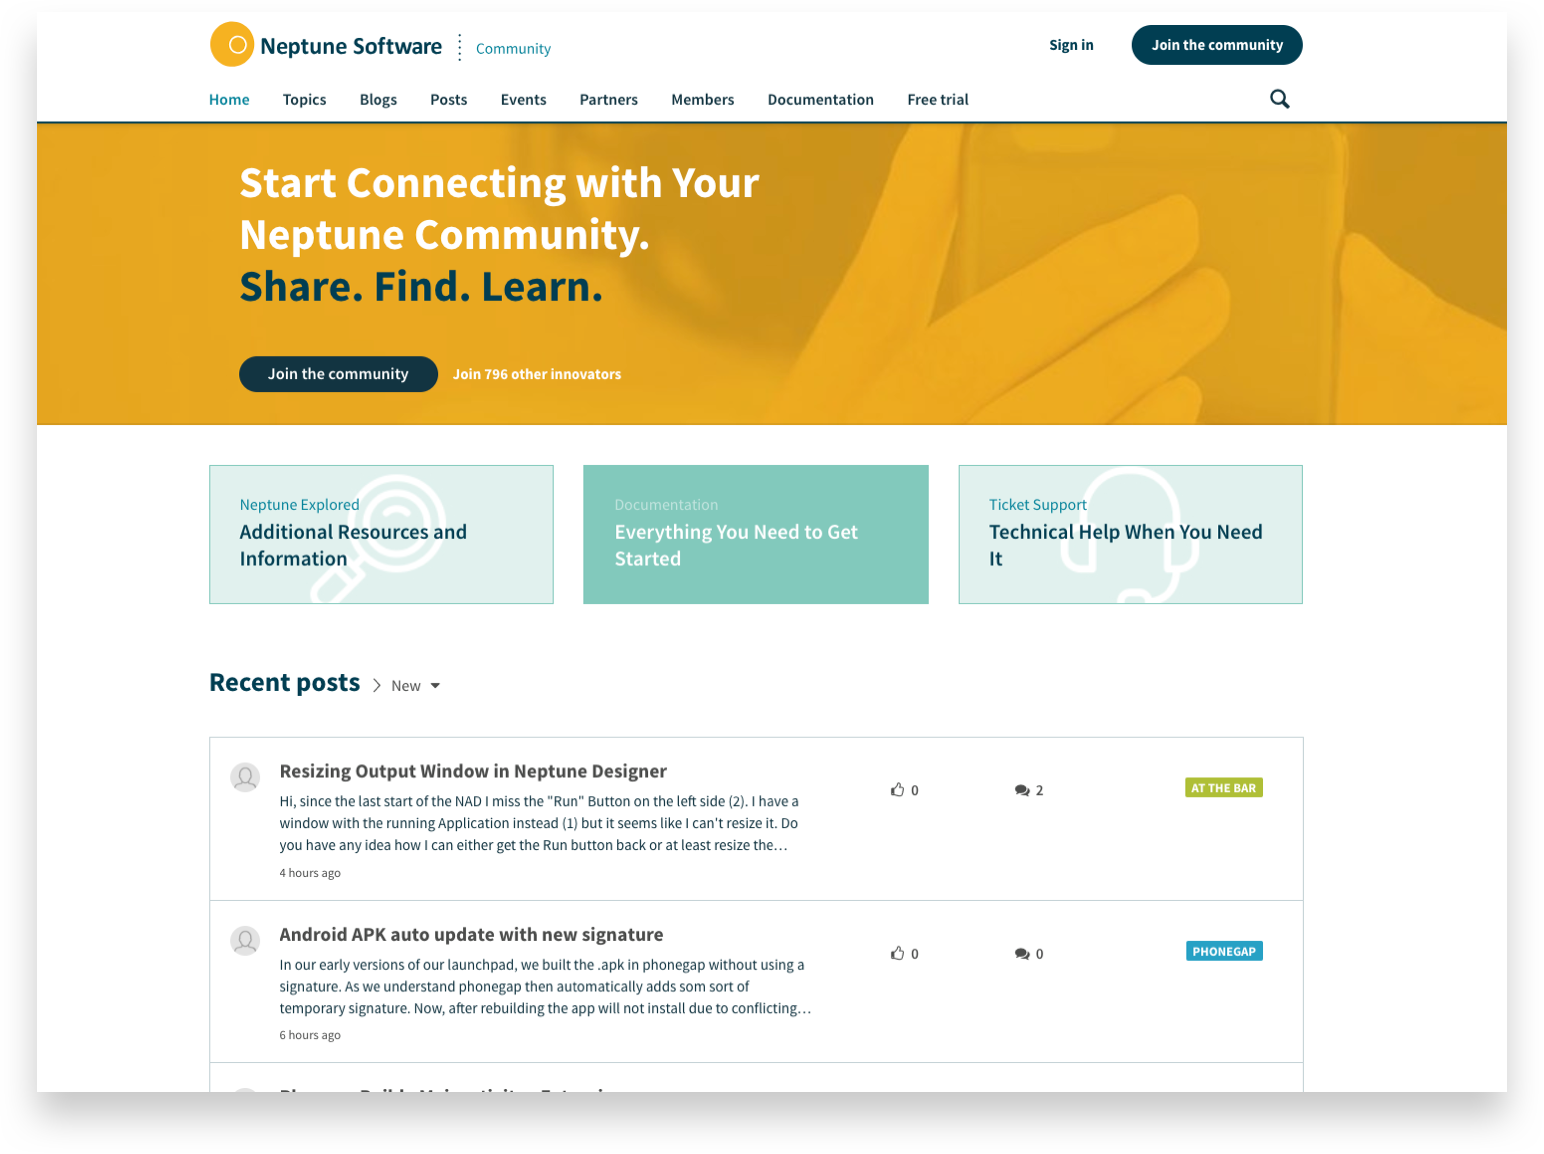 The Neptune Software community homepage.